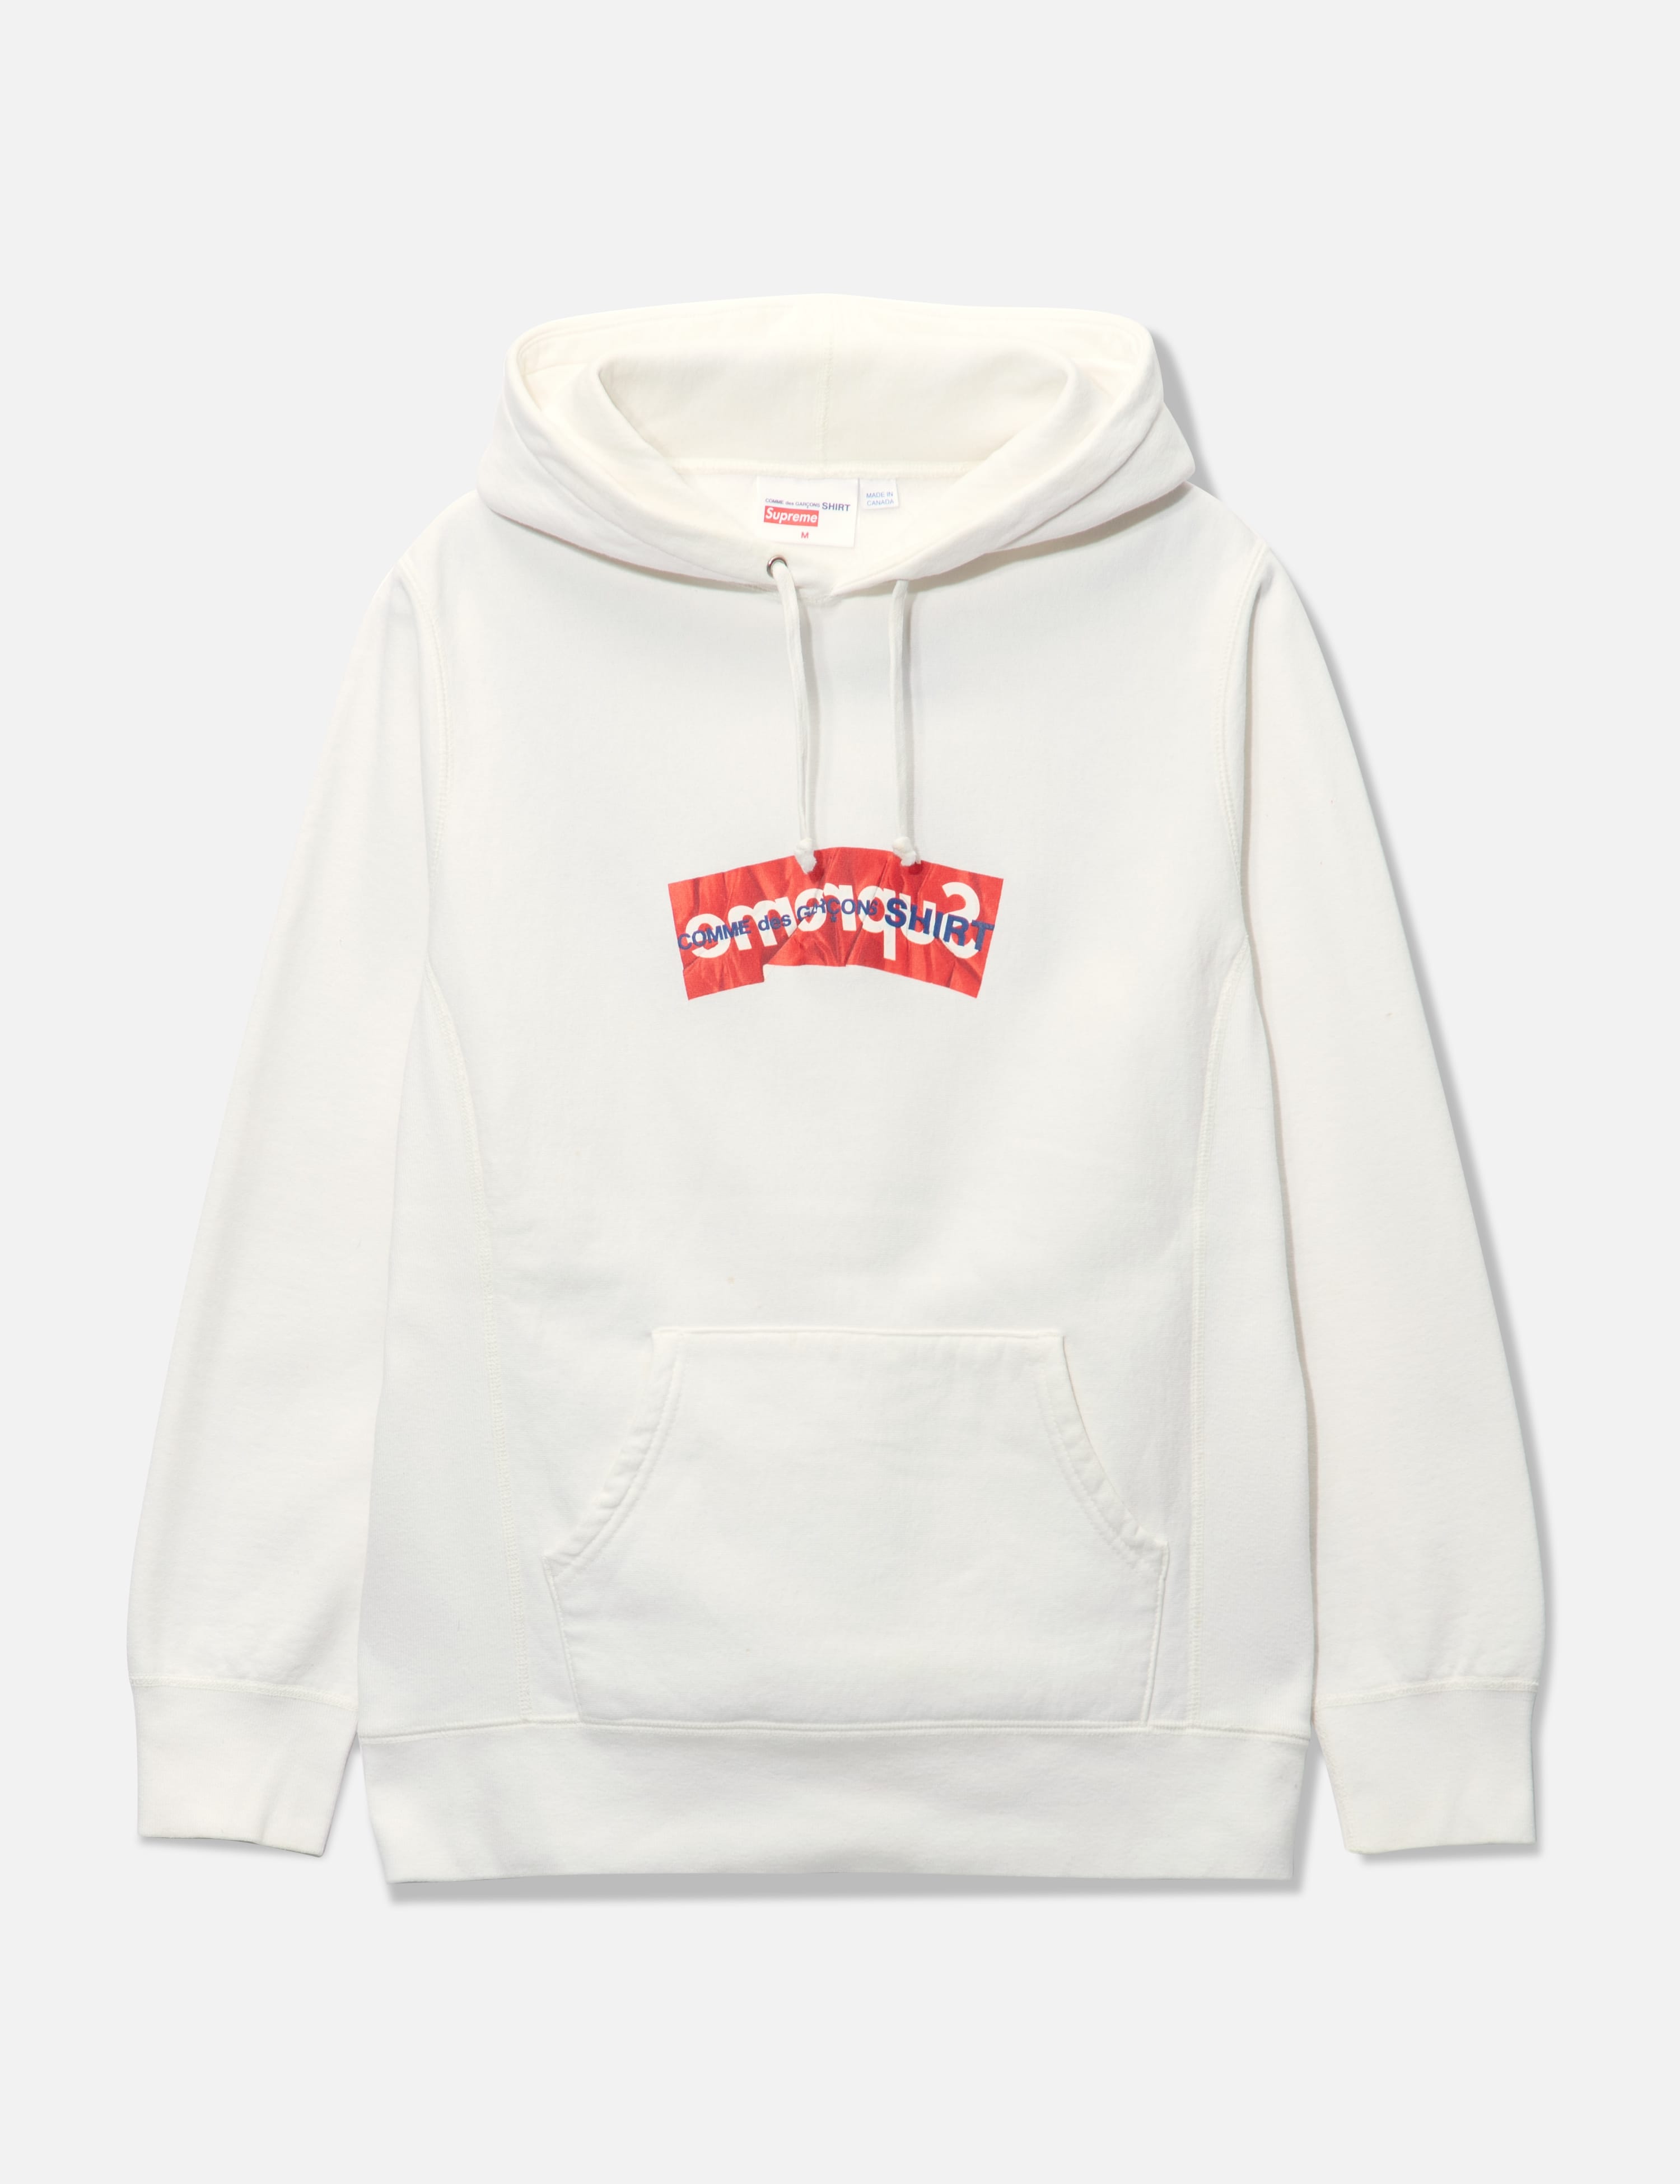 Verdy - VERDY DOVER STREET MARKET HOODIE | HBX - Globally Curated 